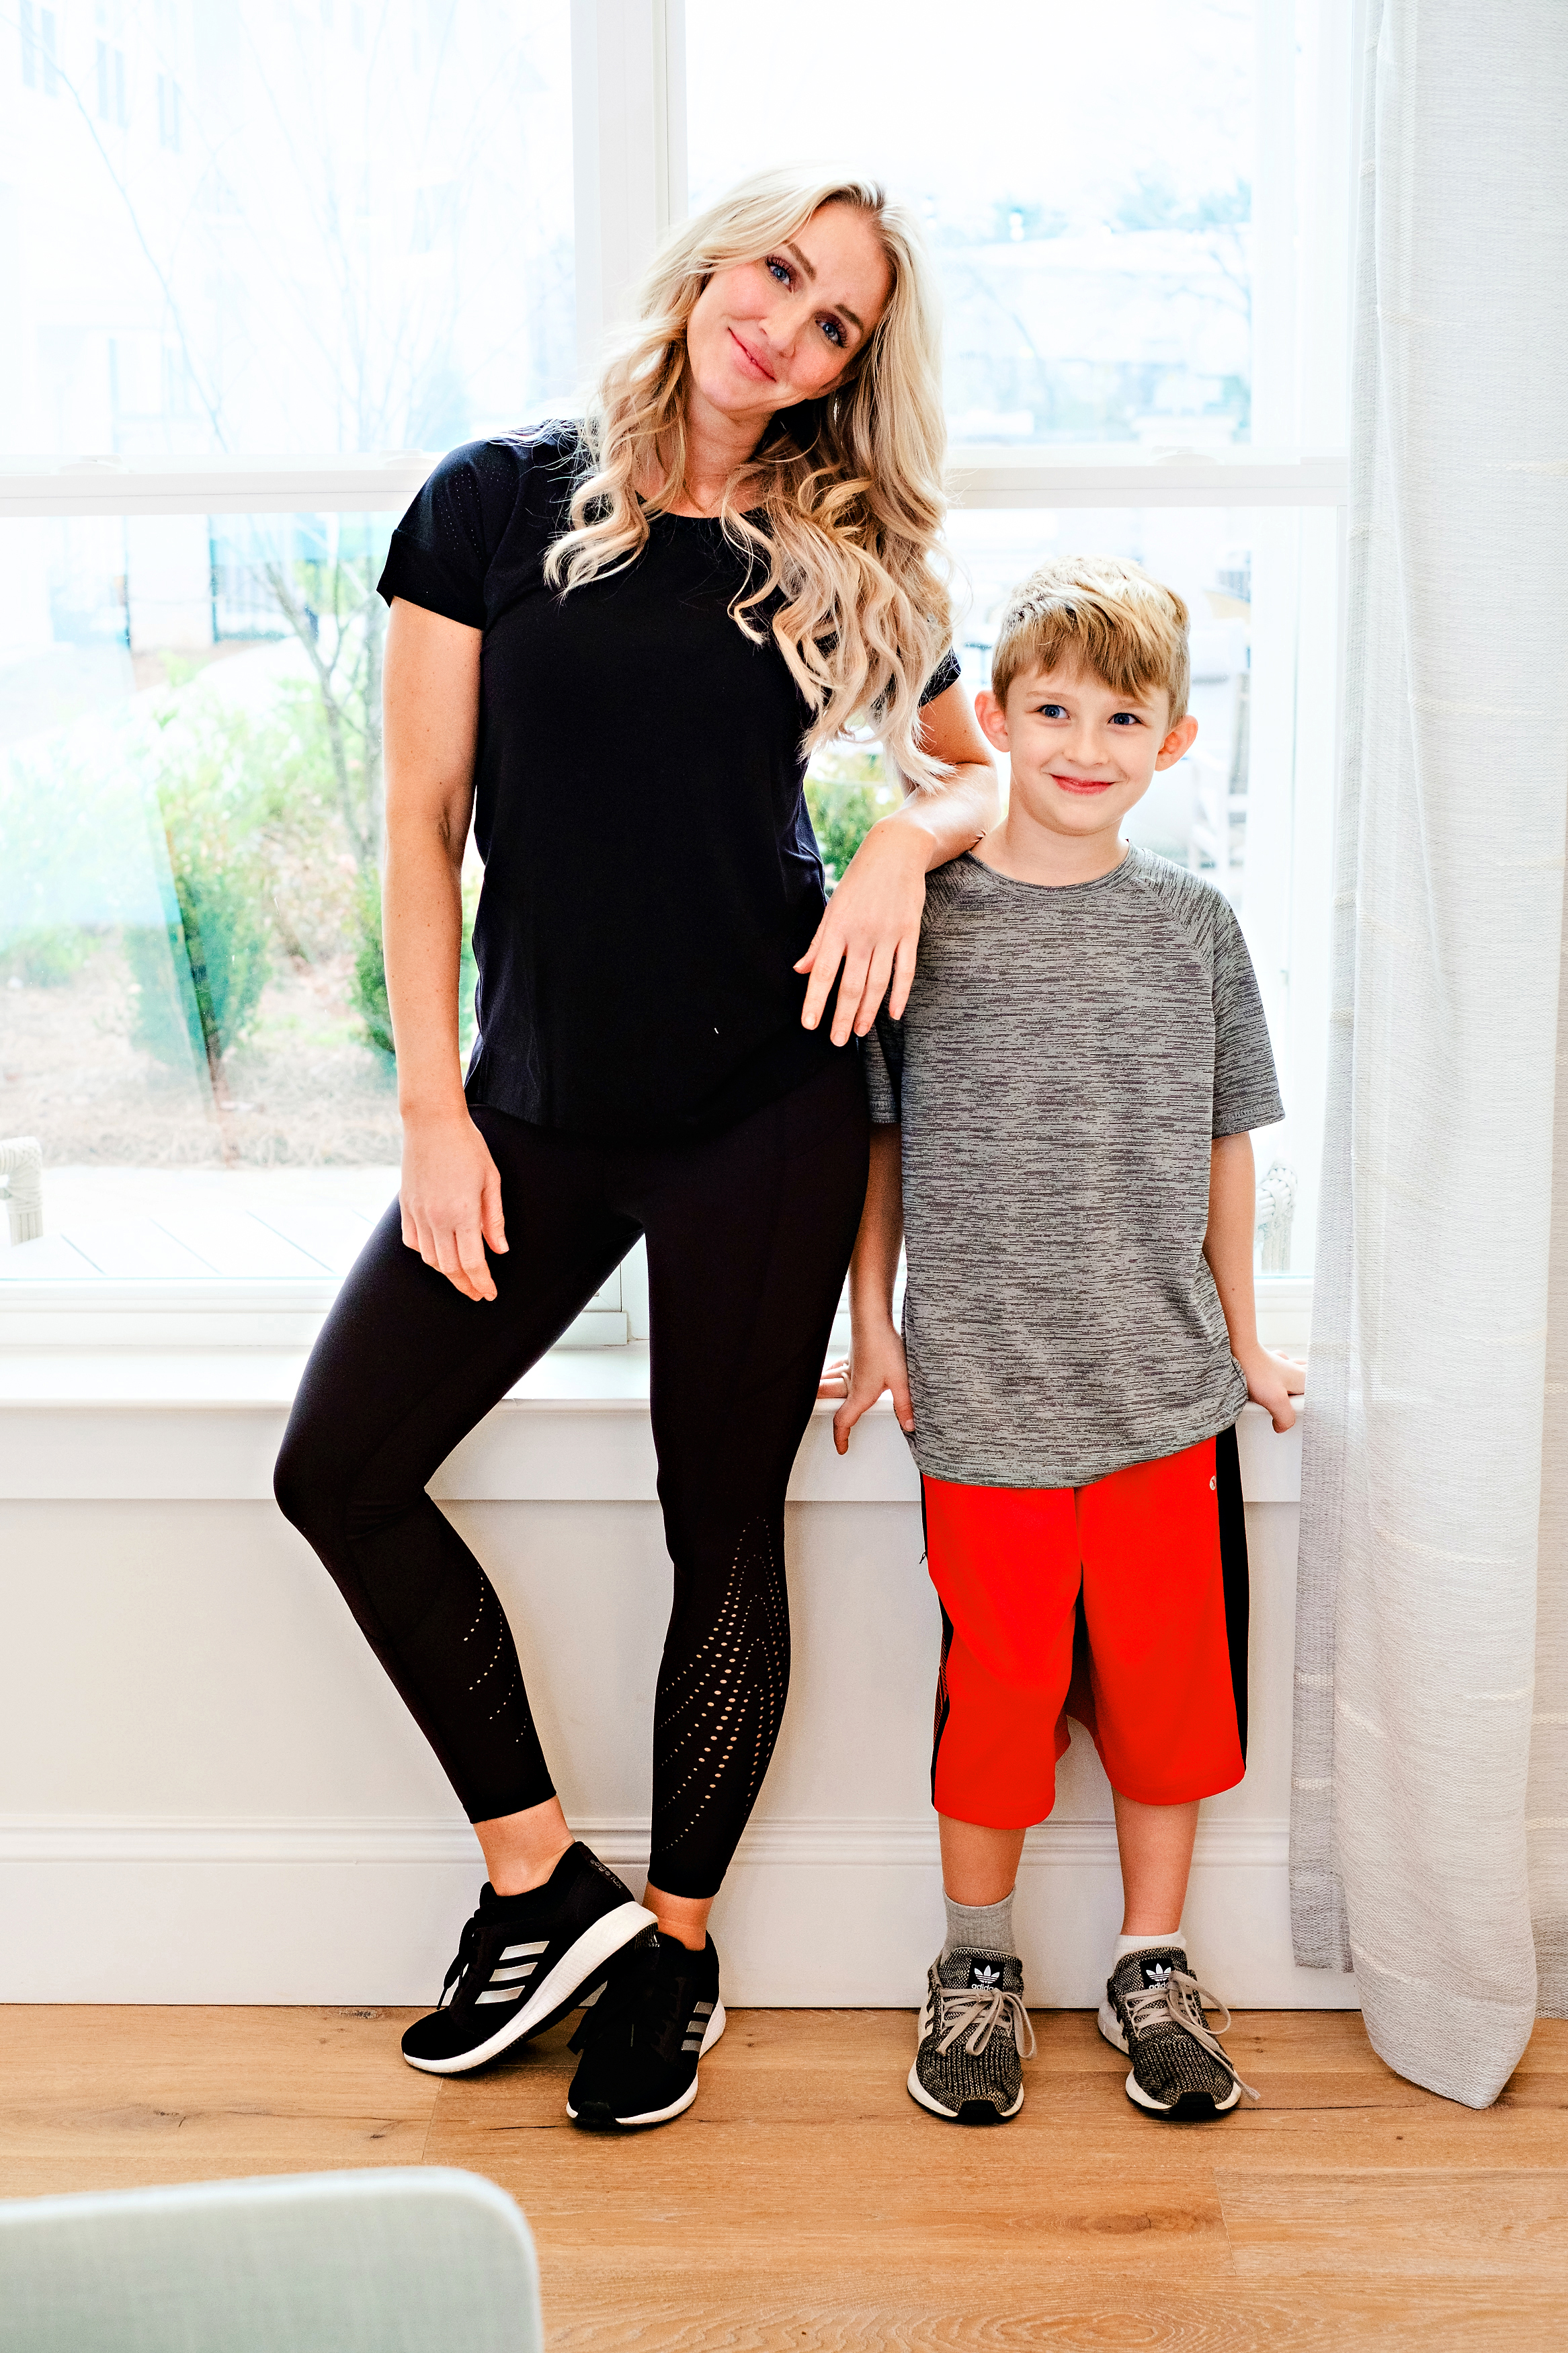 Blonde woman named Jessica from Happily Hughes in black leggings with a black t-shirt leaning her arm against her son who is in a grey t-shirt and red shorts smiling for the camera!